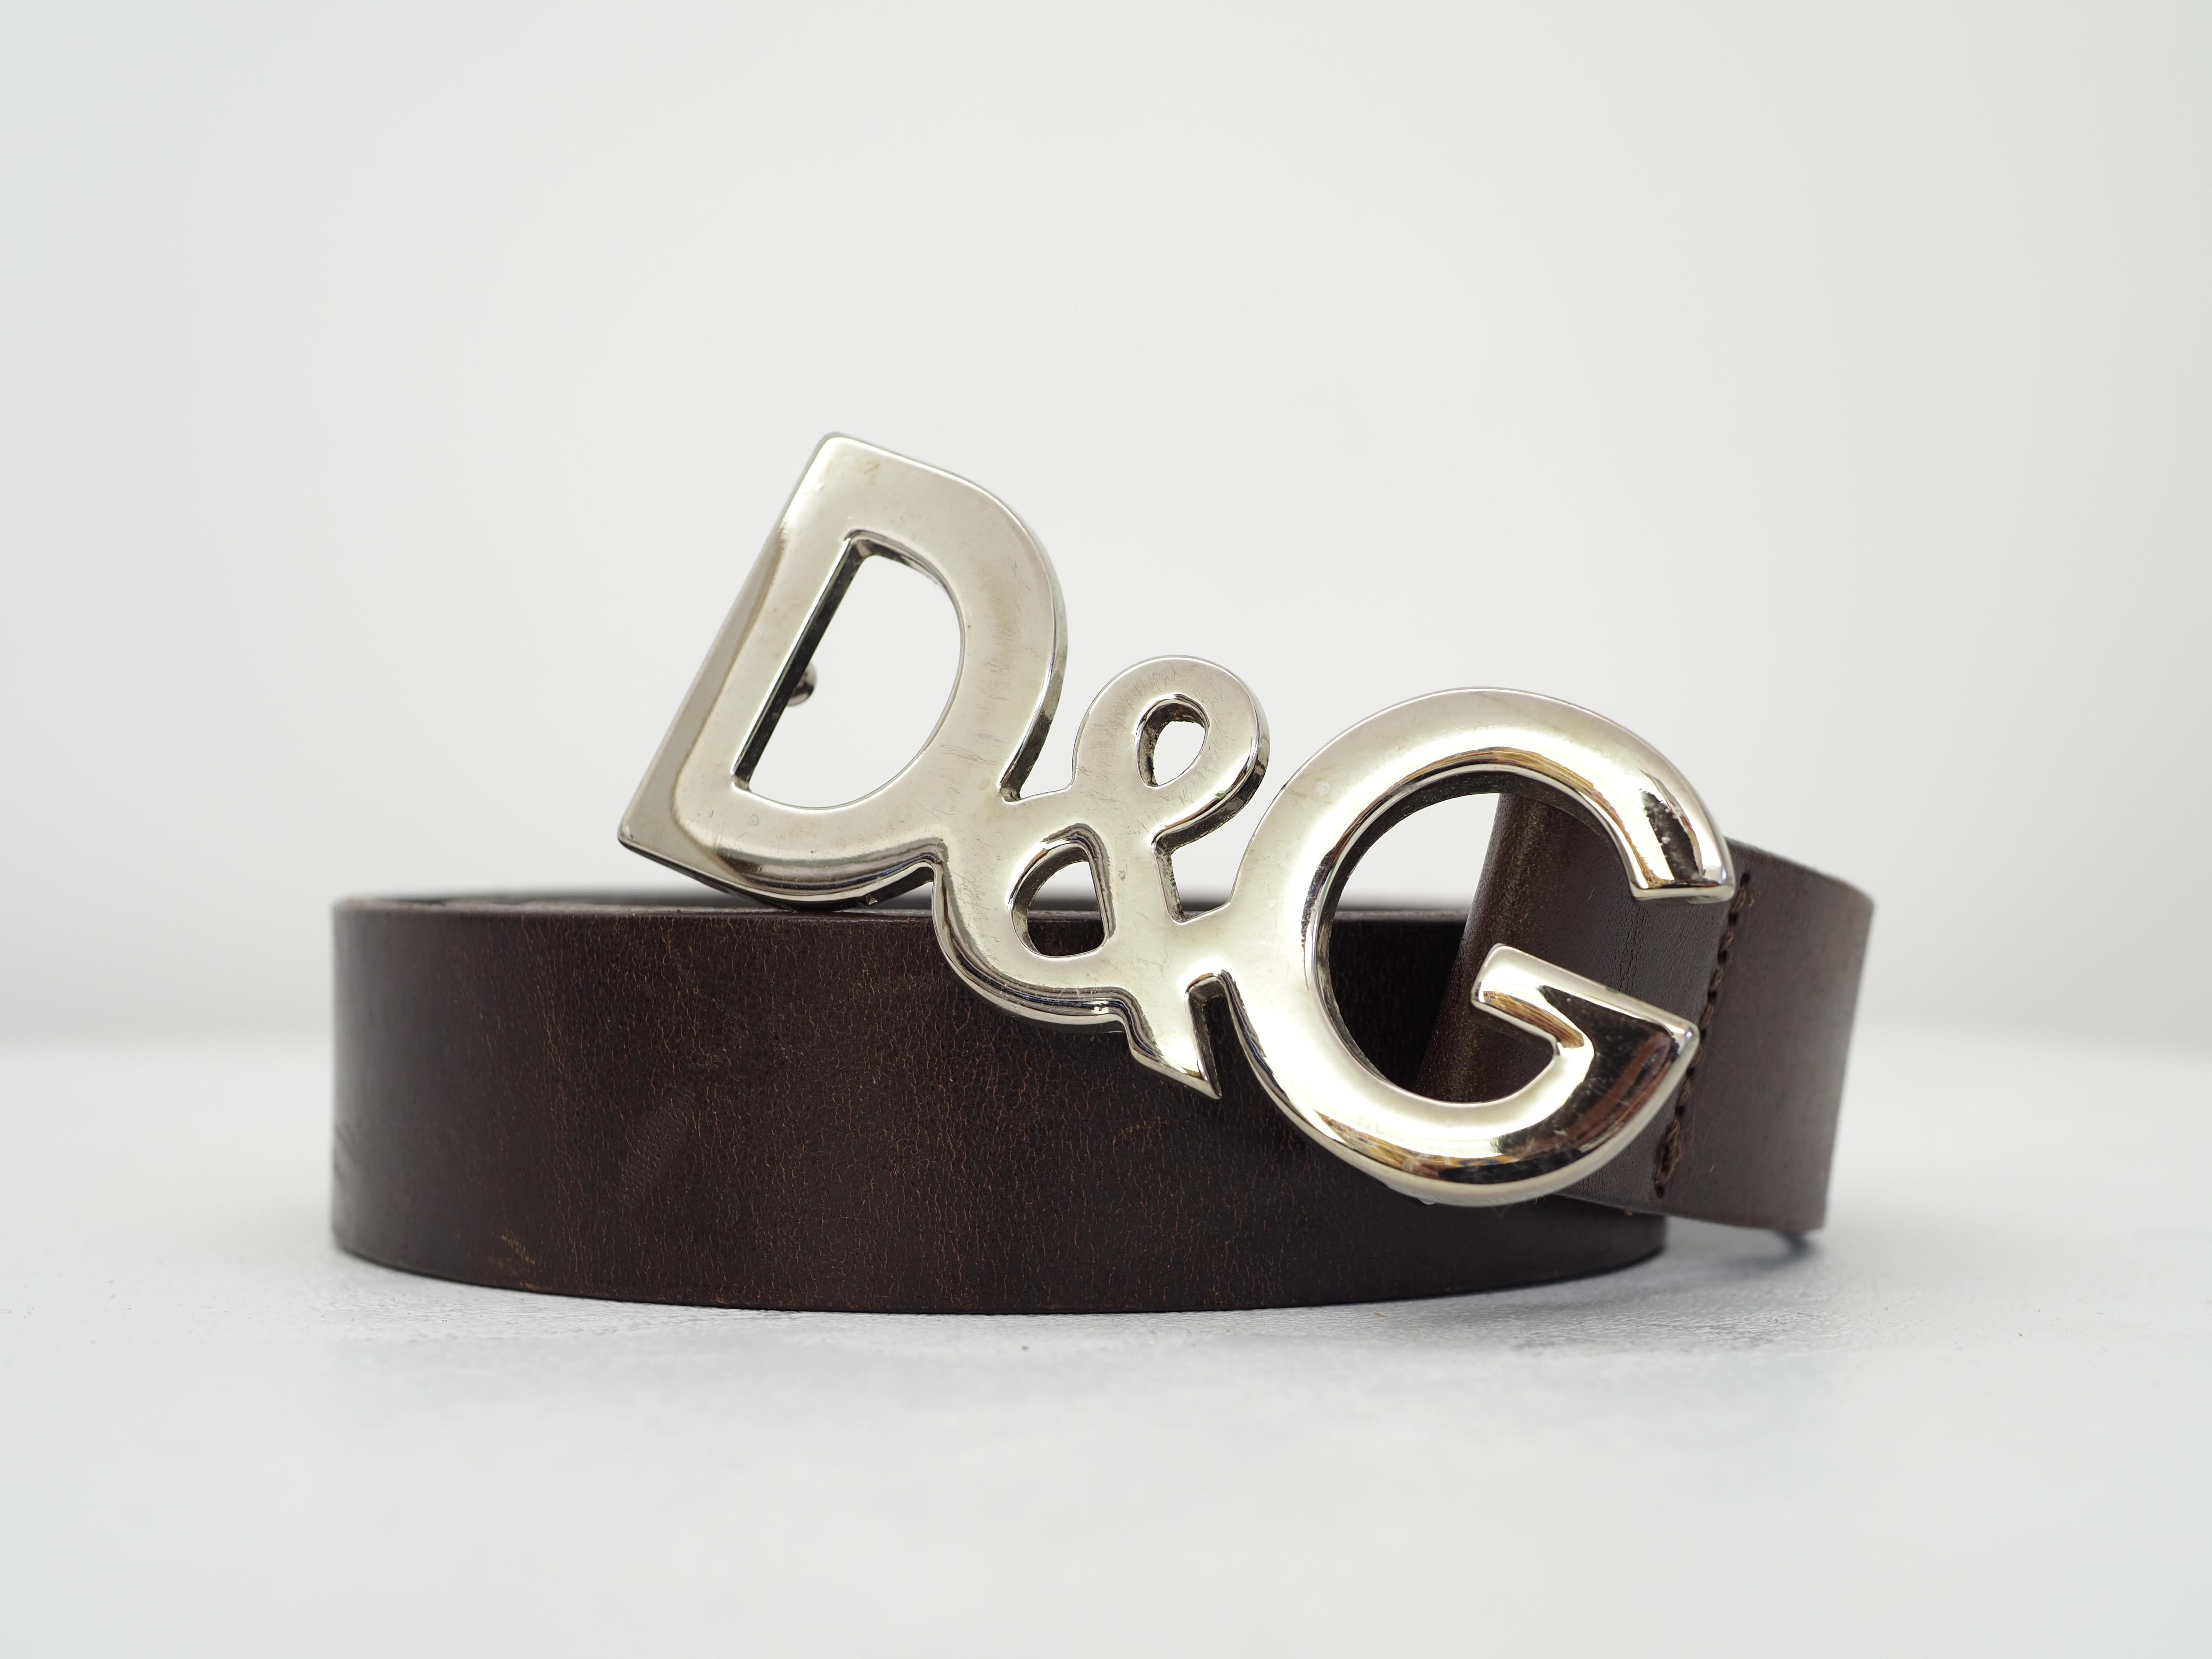 Dolce & Gabbana leather belt
silver hardware
totally made in italy
size 95